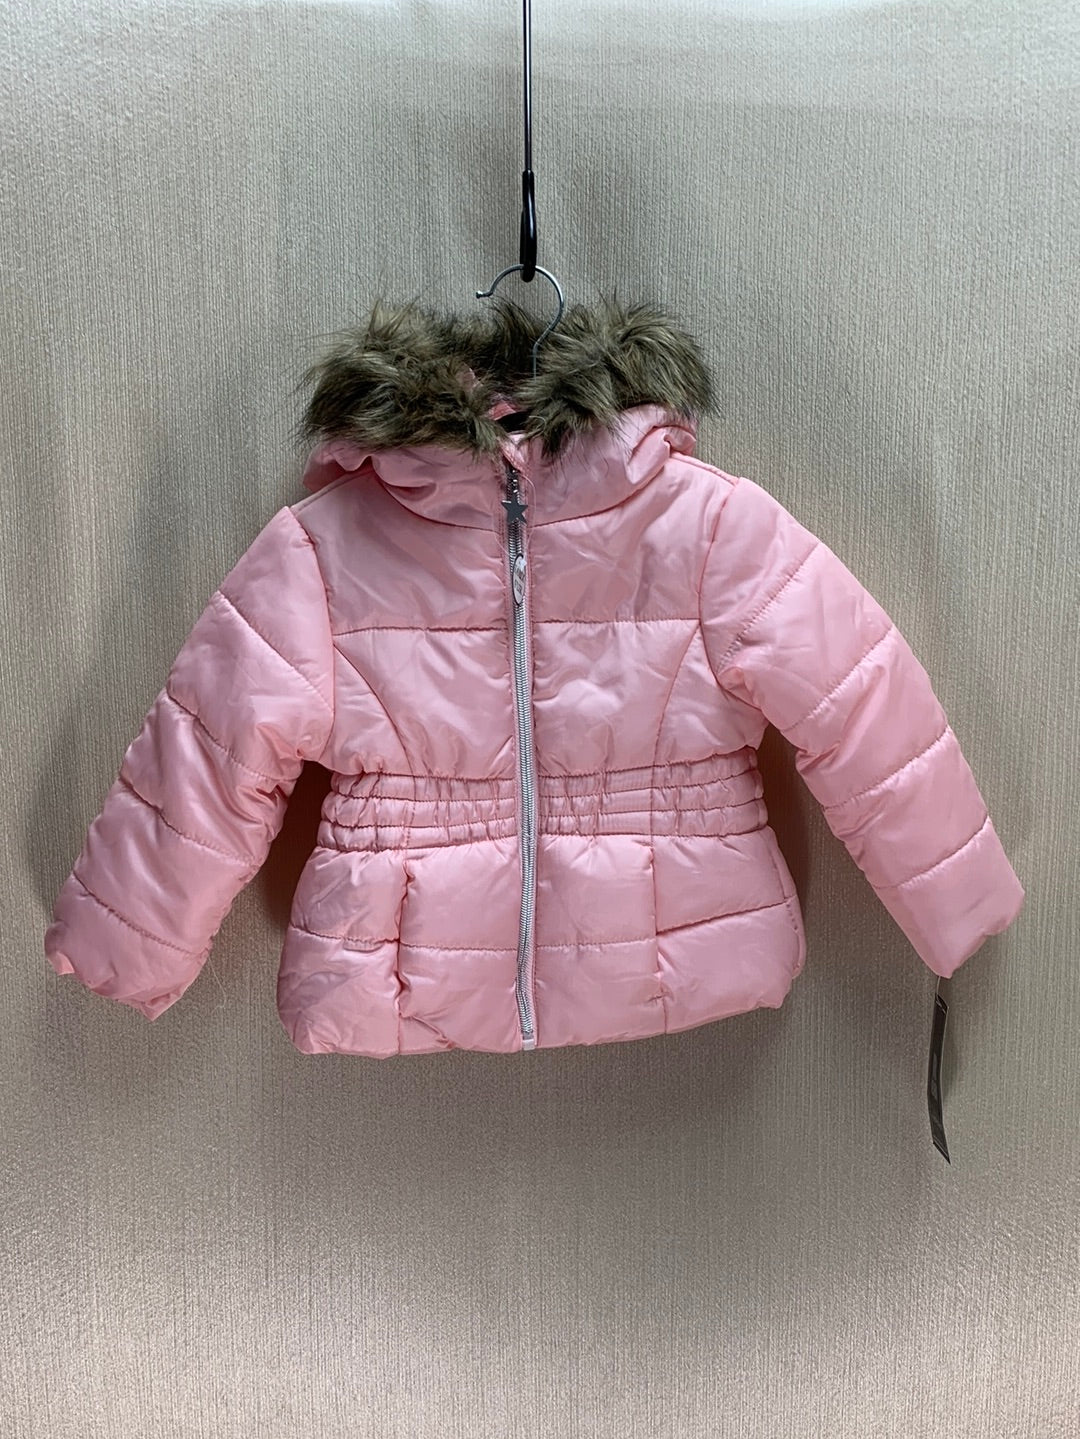 NWT - R 1881 by S. ROTHSCHILD pink Faux Fur Puffer Hooded Jacket - 2T